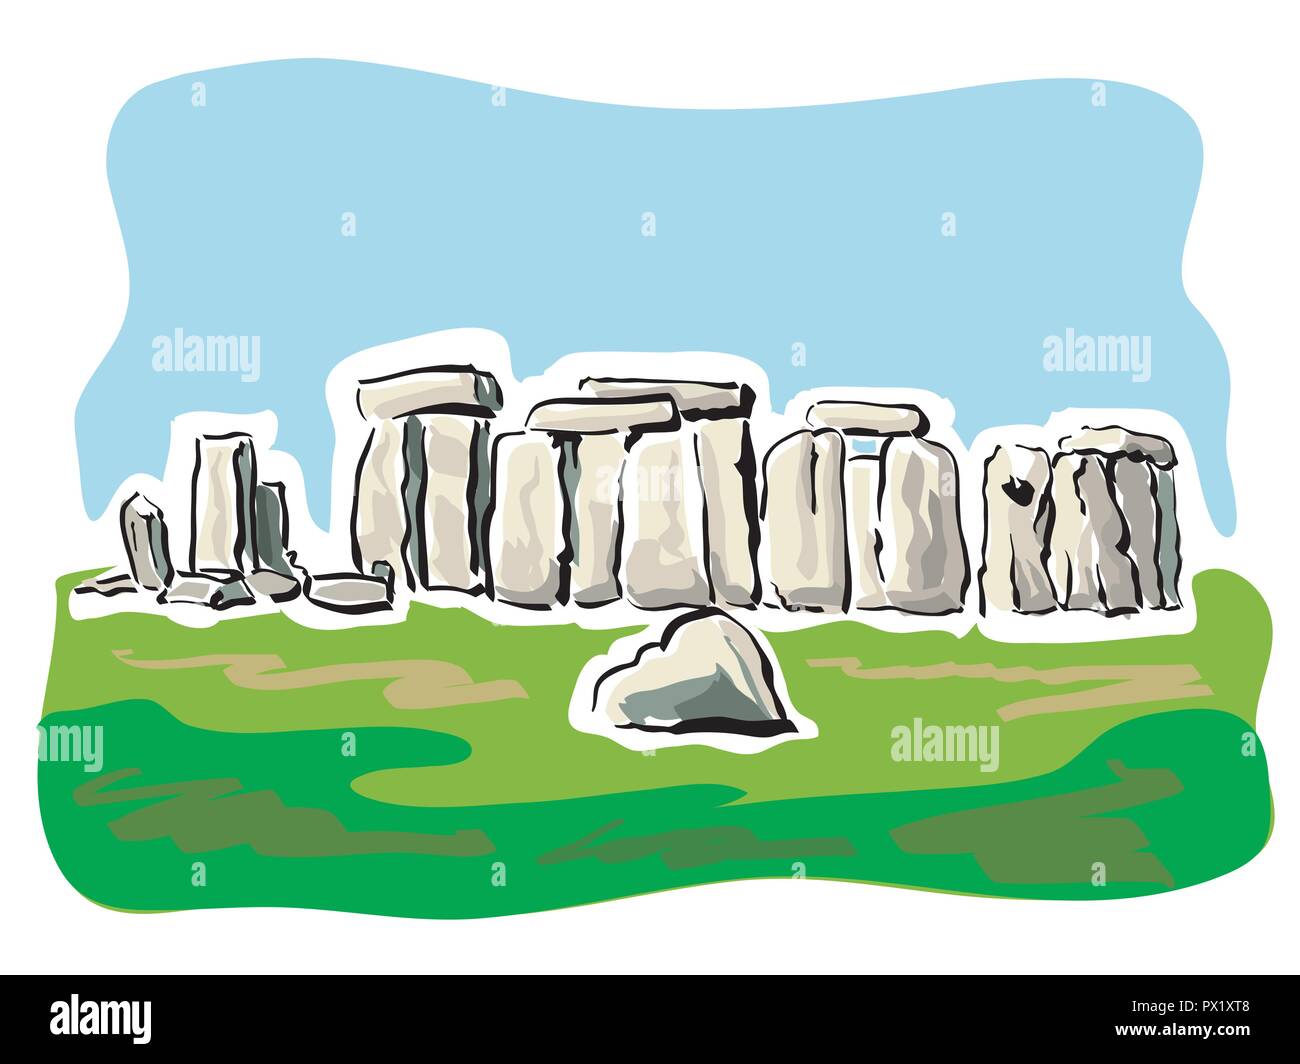 vector illustration of the stonehenge site Stock Vector